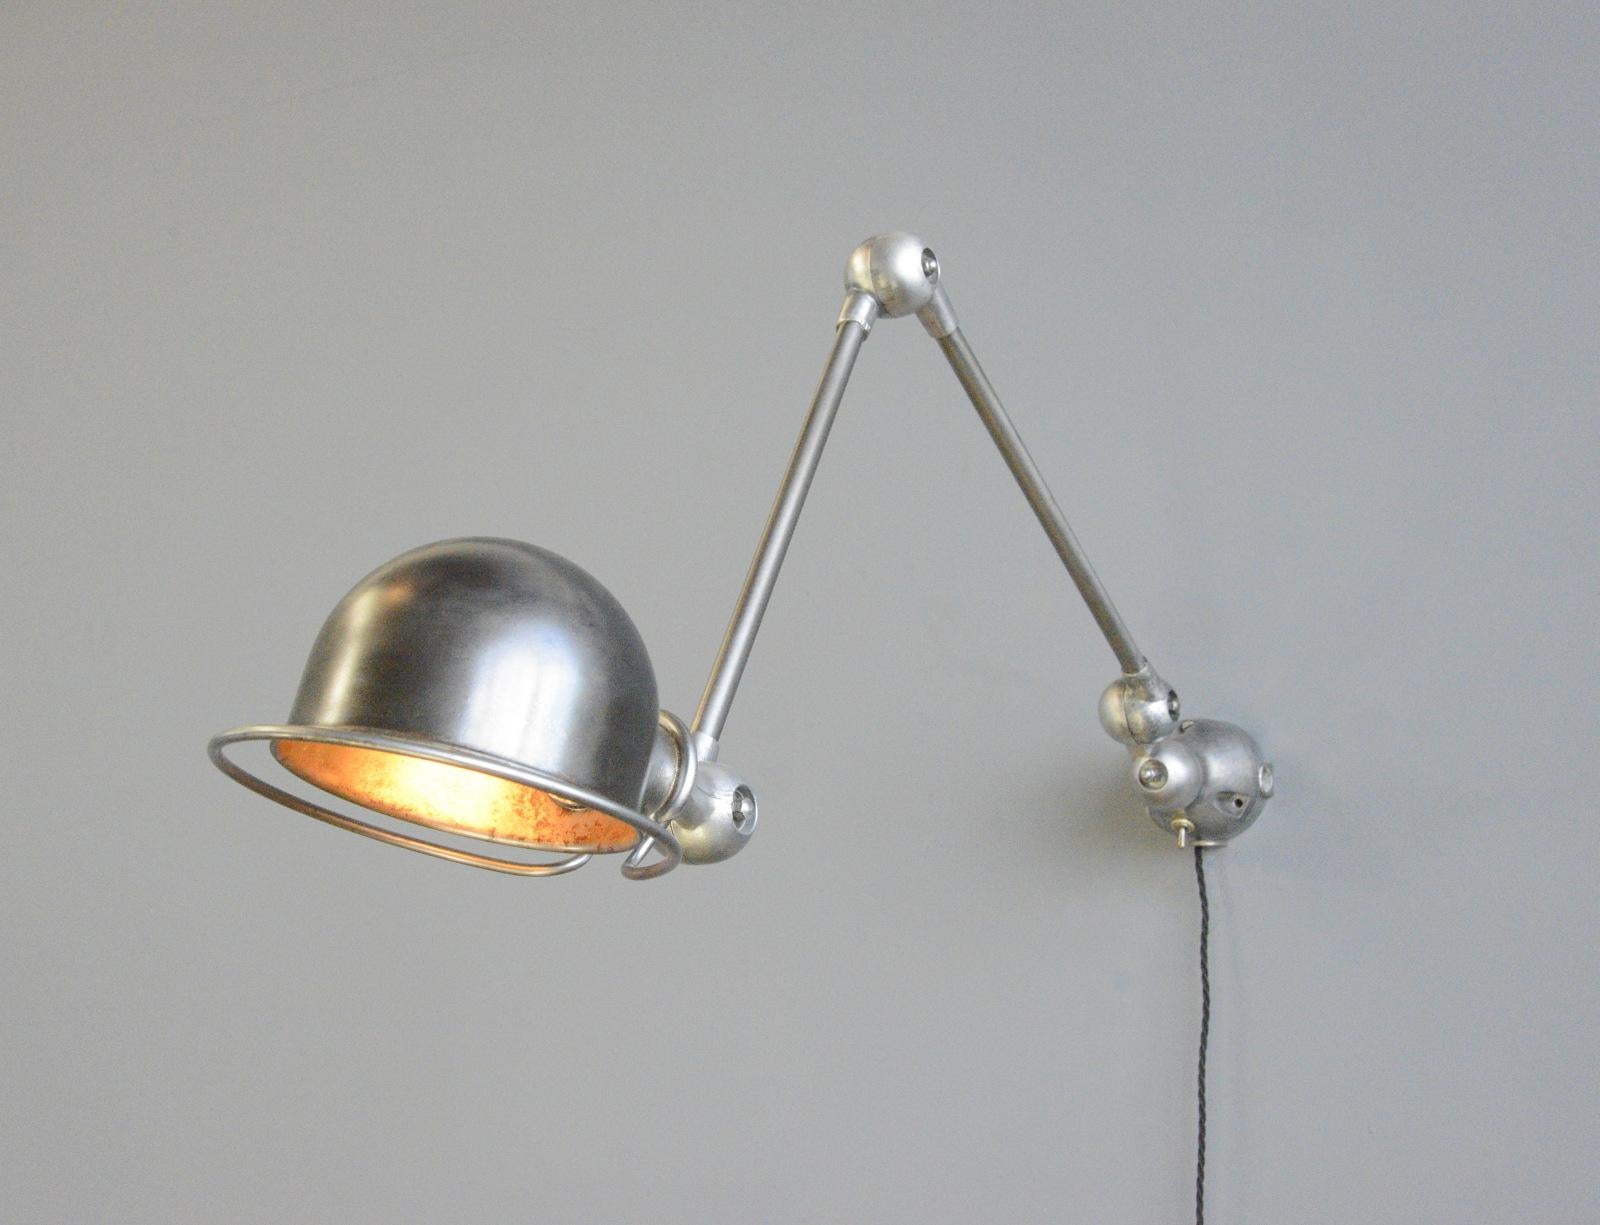 Wall Mounted Industrial Lamp By Jielde, circa 1950s

- Articulated arms and shade
- Brushed steel shade
- Cast Aluminium knuckles
- Takes B22 fitting bulbs
- On/Off switch on the wall moubnt
- Designed by Jean Louis Domecq
- Produced by